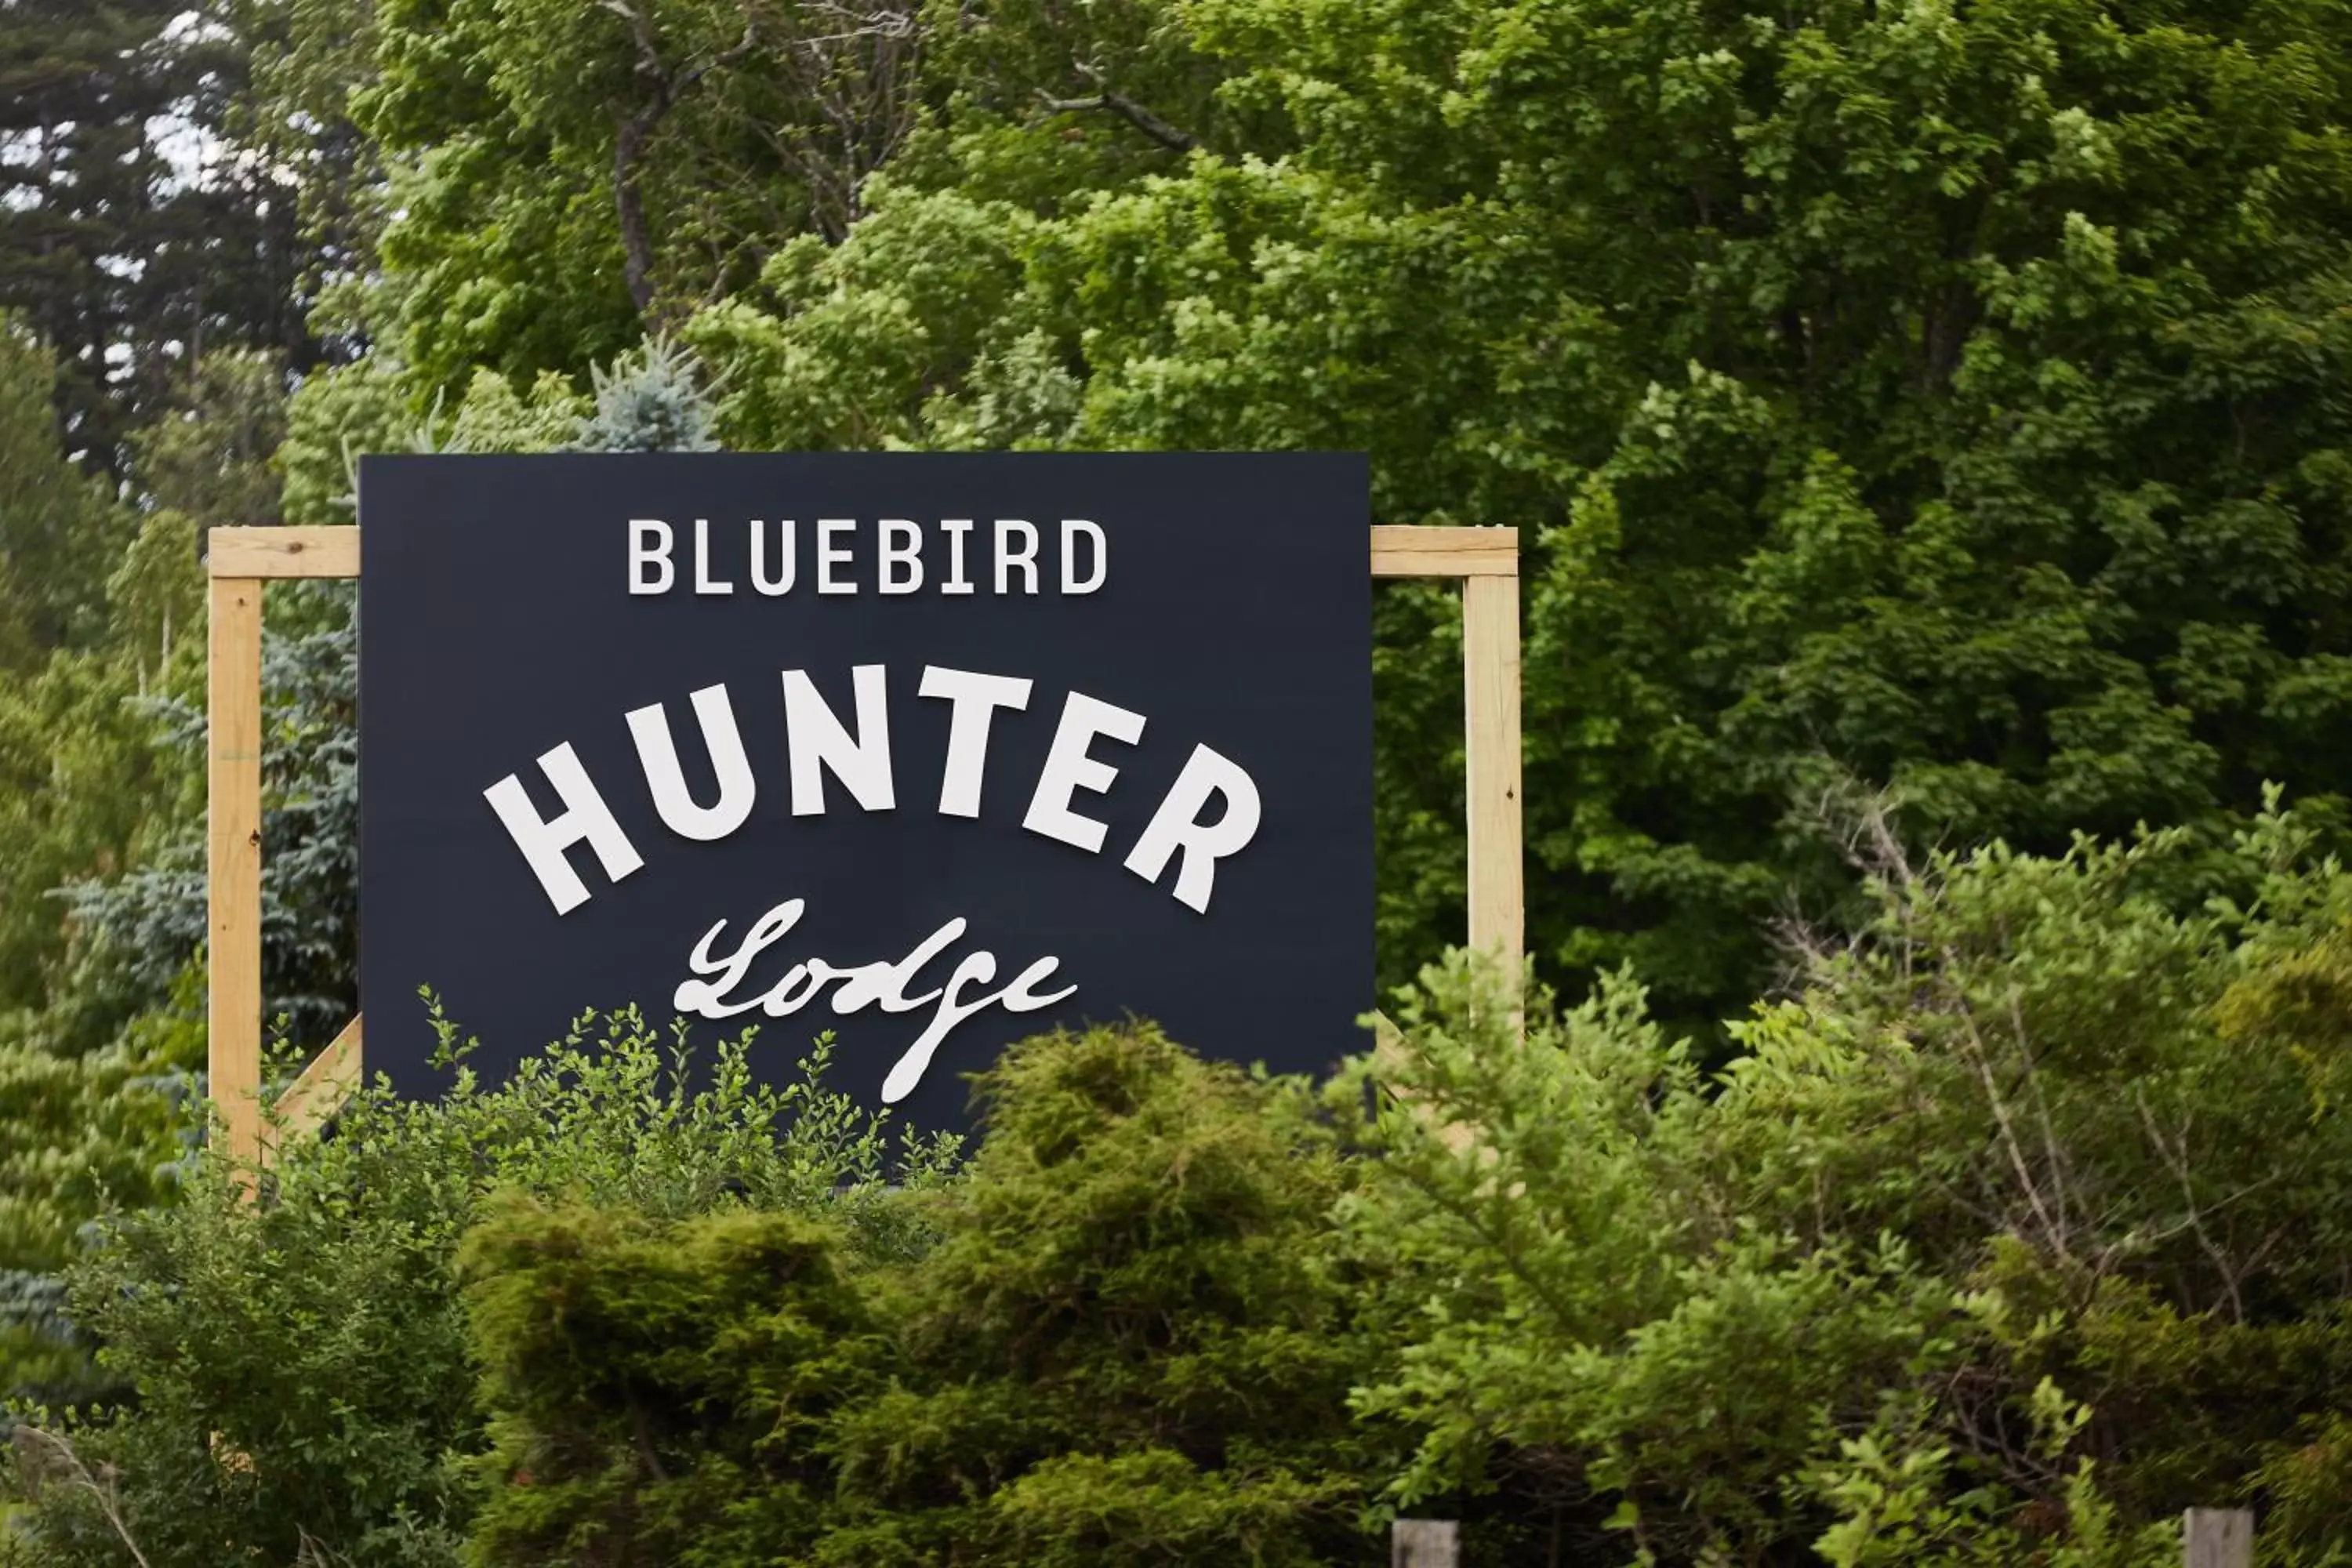 Property logo or sign in Hunter Lodge, a Bluebird by Lark